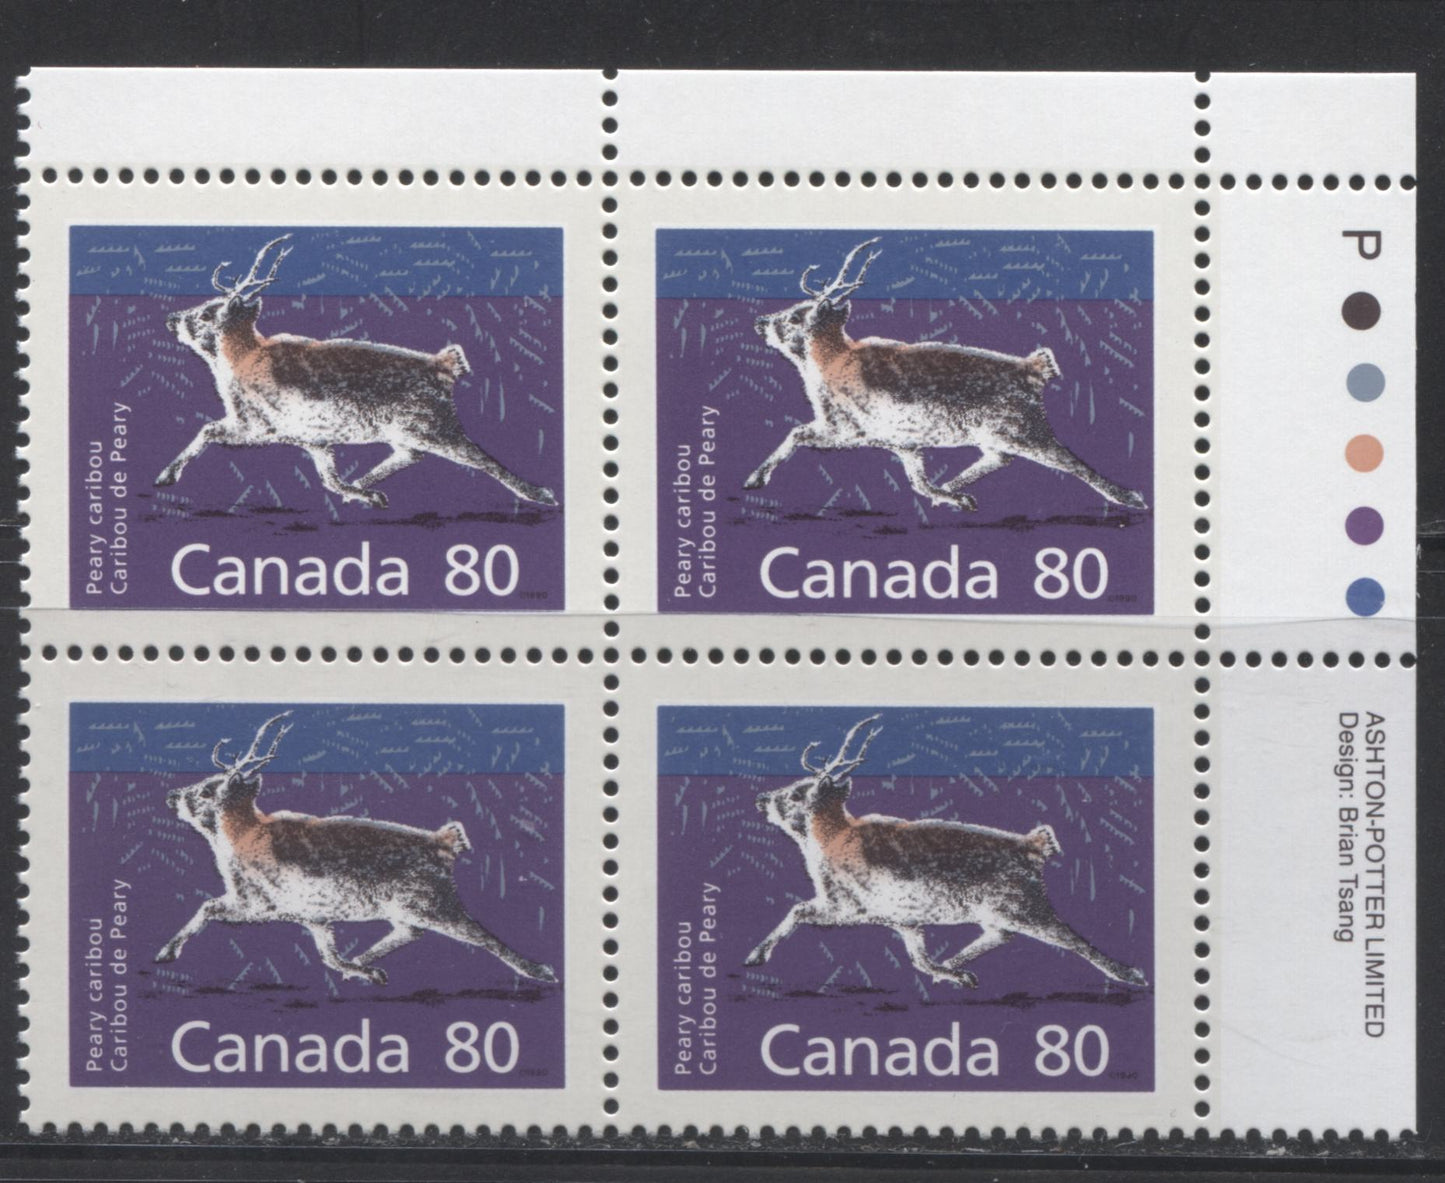 Canada #1180c 80c Peary Caribou 1988-1991 Wildlife and Architecture Issue, VFNH UR Inscription Block on DF/LF Peterborough Paper, Perf. 14.4 x 13.8